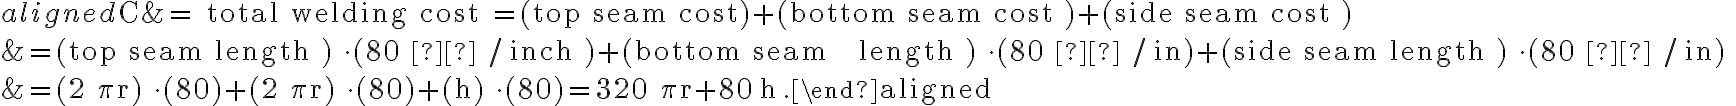 \begin{aligned}\mathrm{C} &=\text { total welding cost }=(\text { top seam } \mathrm{cost})+(\text { bottom seam cost })+(\text { side seam cost }) \\&=(\text { top seam length }) \cdot(80 ¢ / \text { inch })+(\text { bottom seam
    length }) \cdot(80 ¢ / \mathrm{in})+(\text { side seam length }) \cdot(80 ¢ / \mathrm{in}) \\&=(2 \pi \mathrm{r}) \cdot(80)+(2 \pi \mathrm{r}) \cdot(80)+(\mathrm{h}) \cdot(80)=320 \pi \mathrm{r}+80 \mathrm{~h} .\end{aligned}